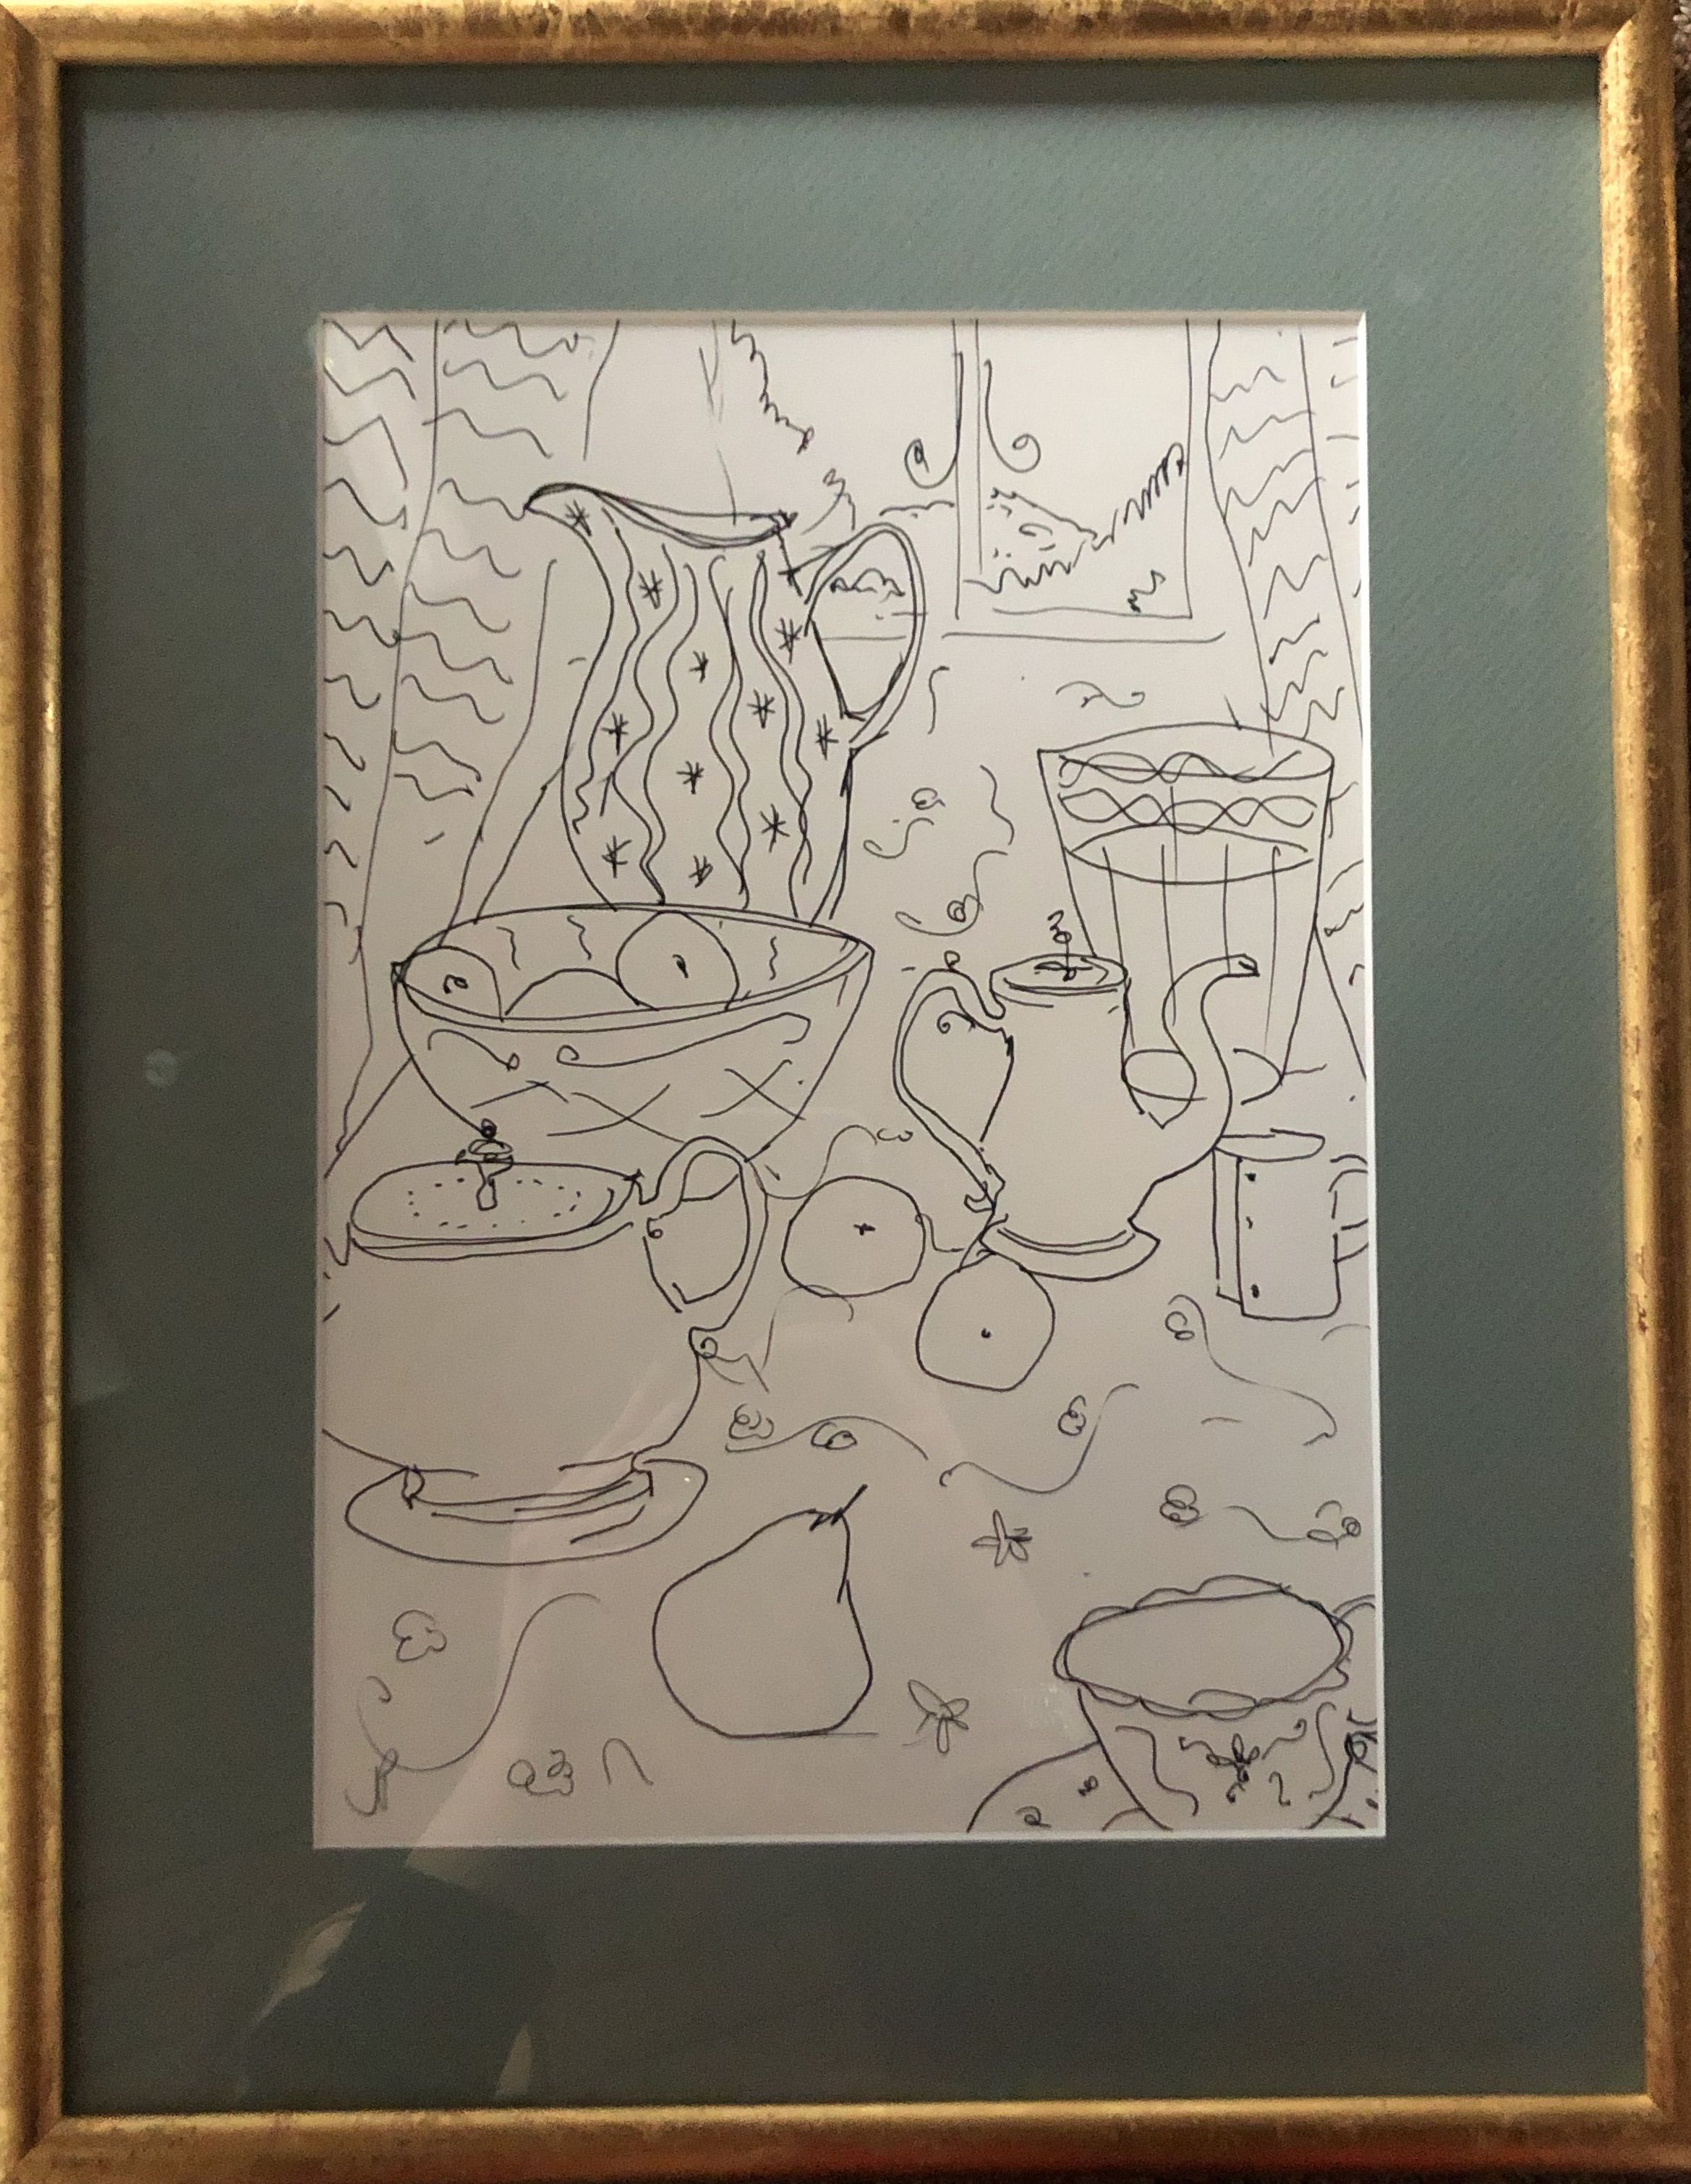 Still Life with Jug, Original Drawing by Jemma Powell - Secondary Image